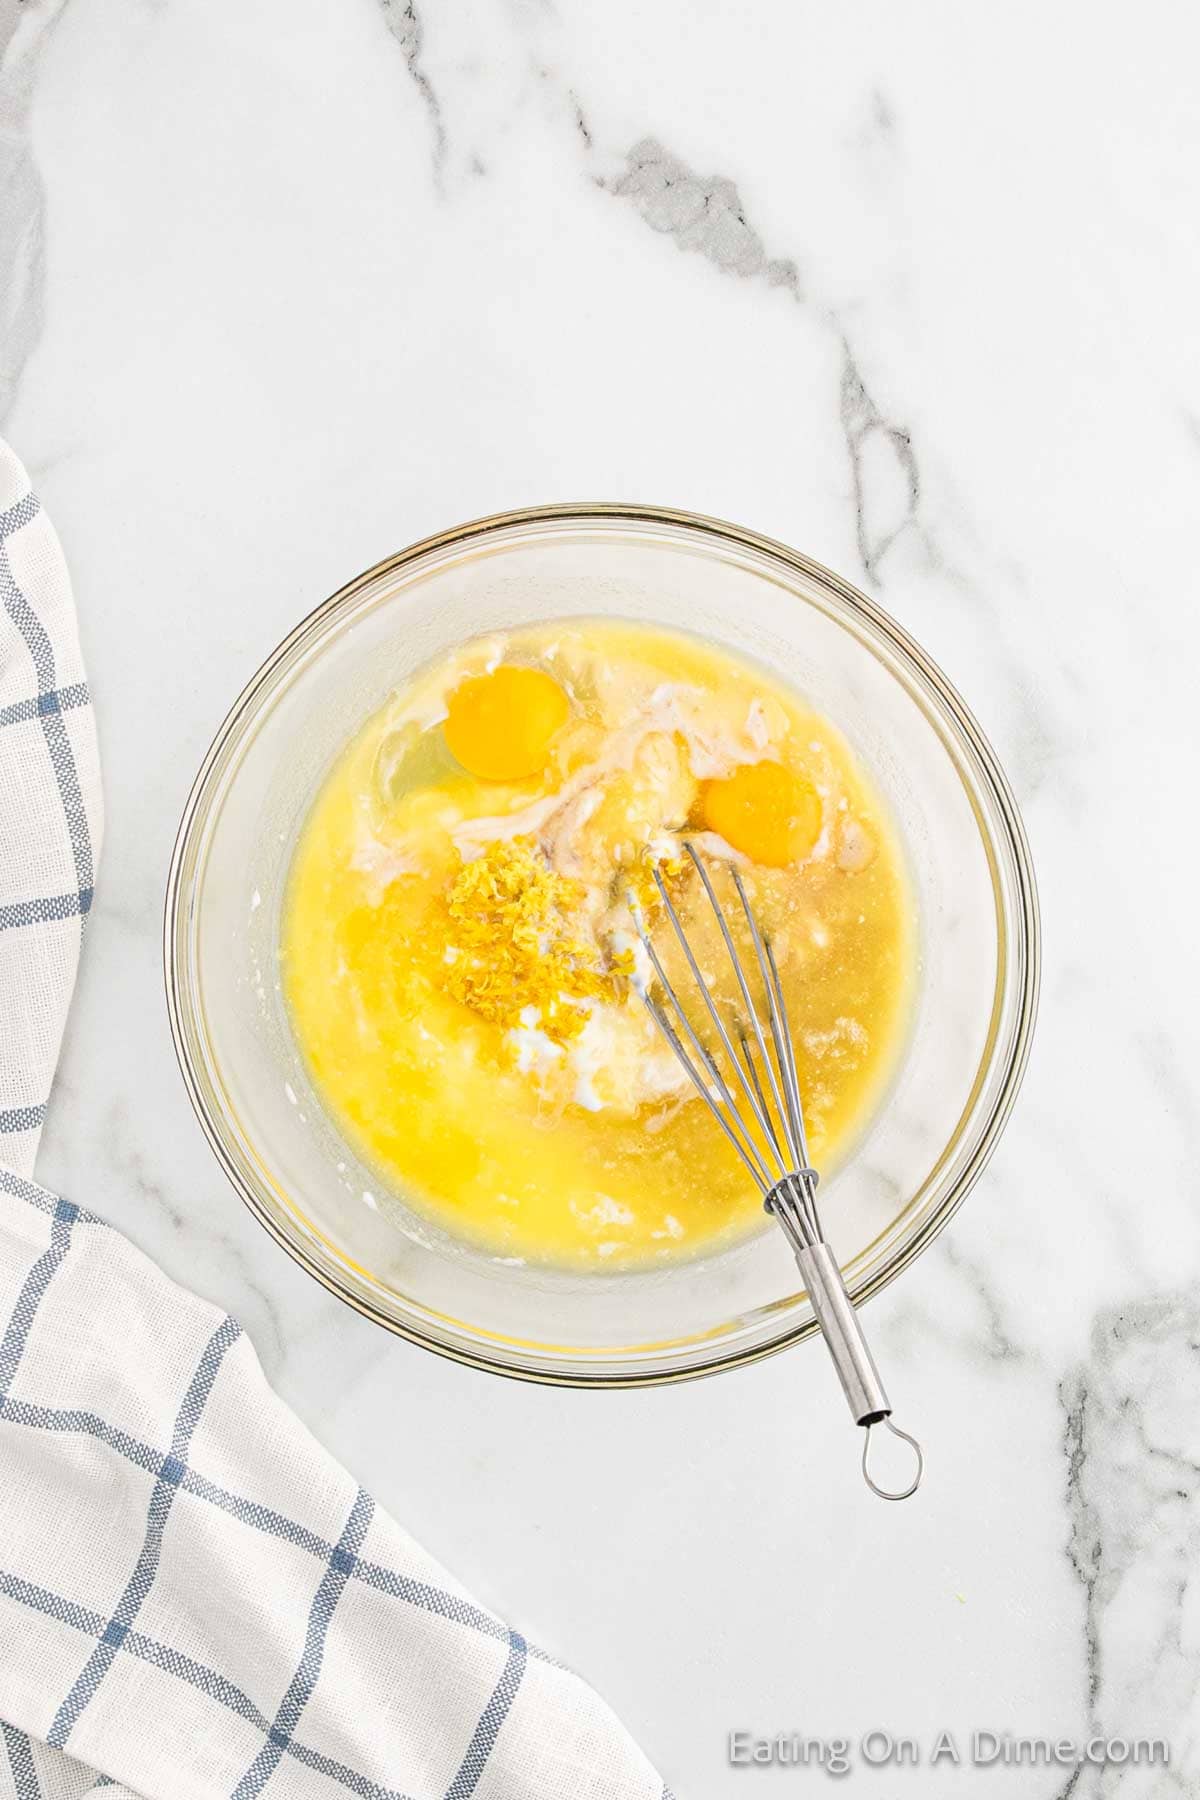 Combine the yogurt, milk, lemon, butter, eggs, and vanilla extract in a bowl with a wooden spoon